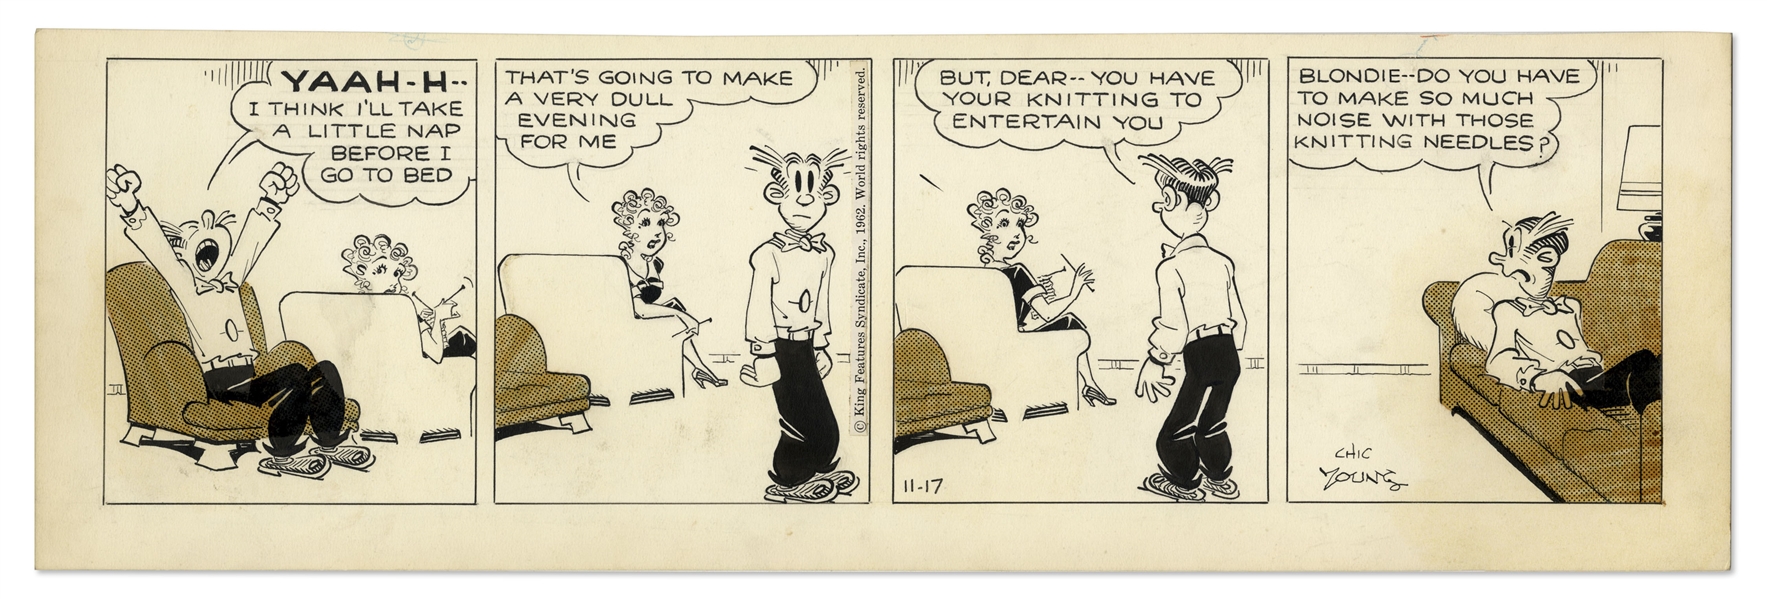 2 Chic Young Hand-Drawn ''Blondie'' Comic Strips From 1962